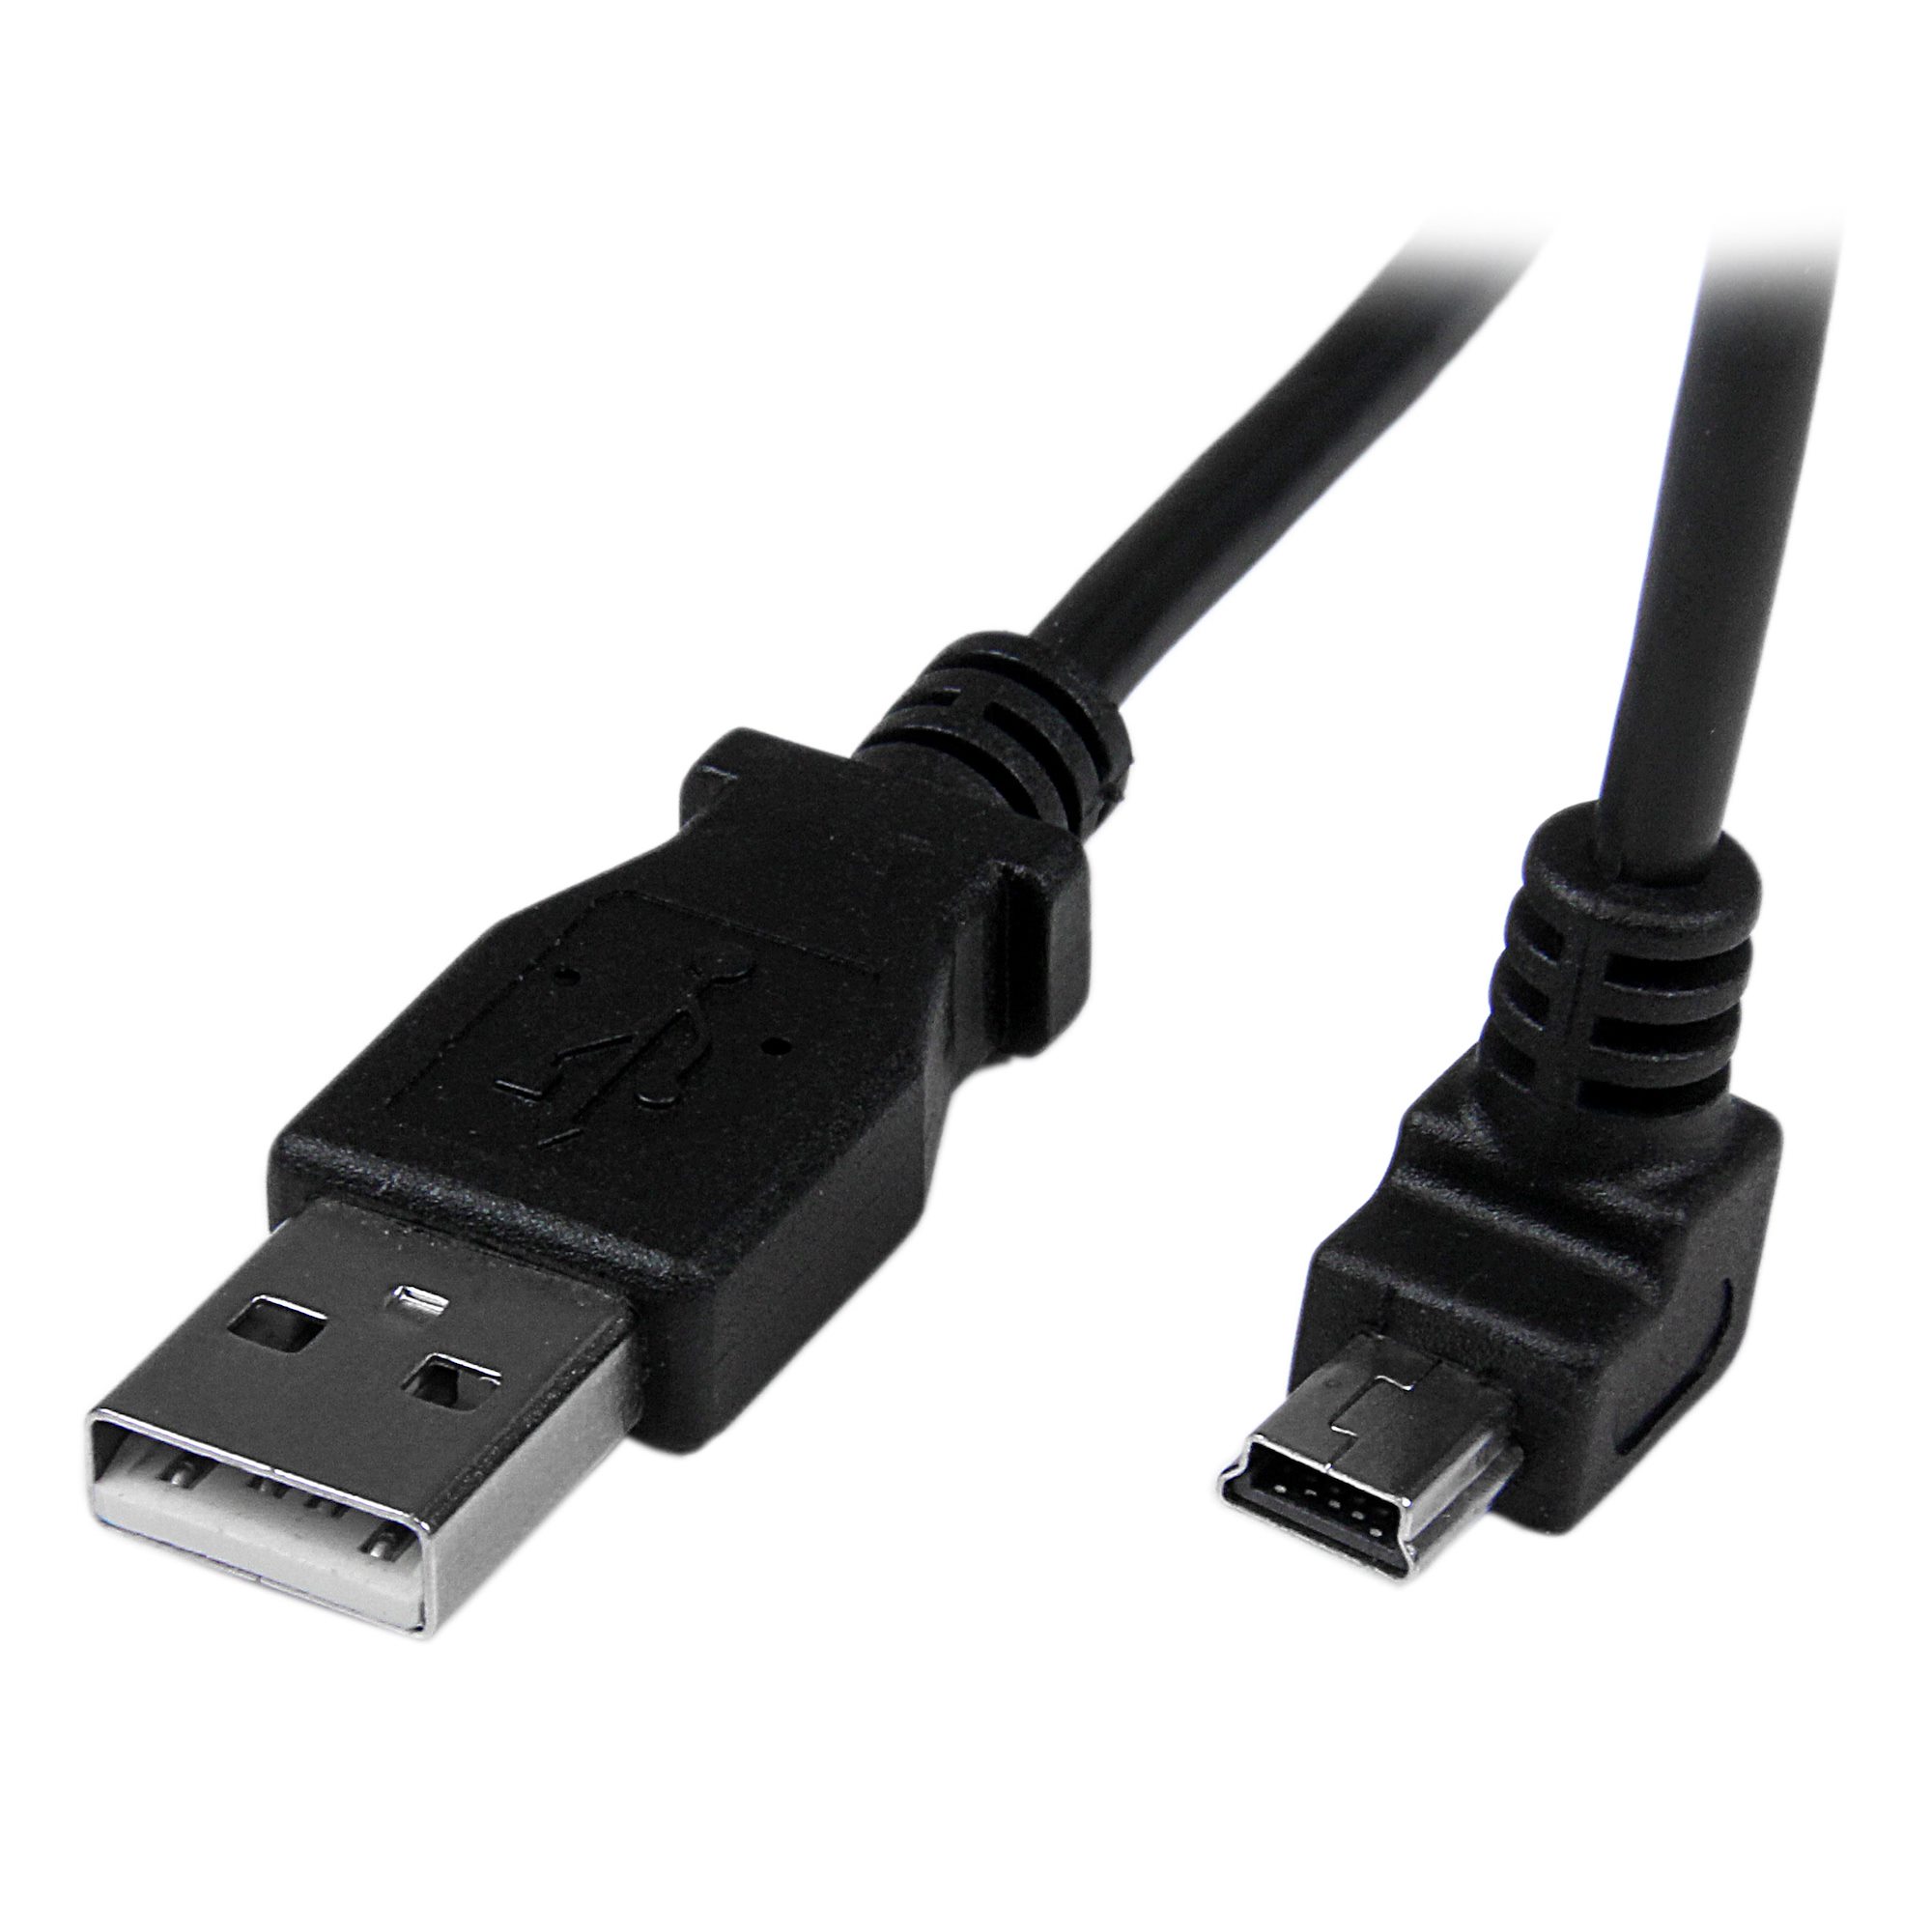 Right-Angle USB 2.0 Cable for Brother PocketJet 6 & 7 Printer